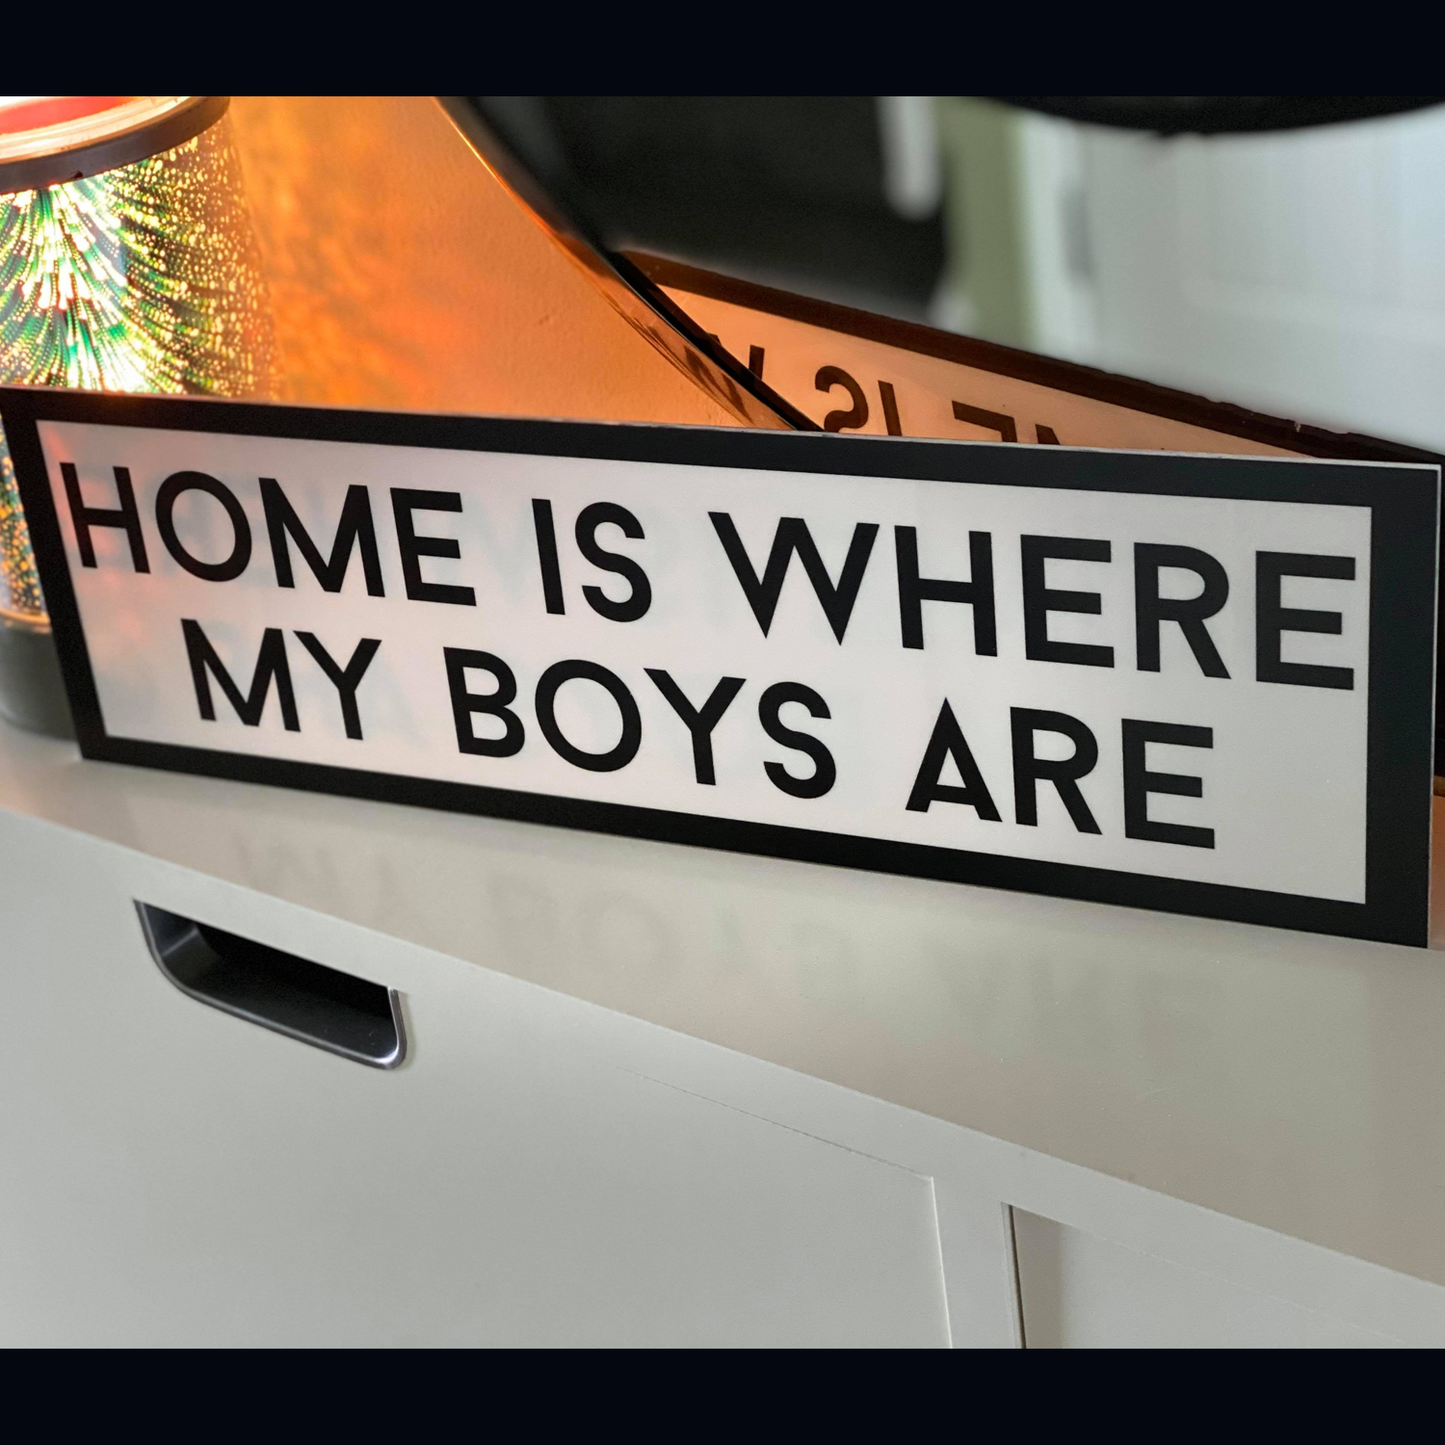 Home is where my ... Personalized Street Sign